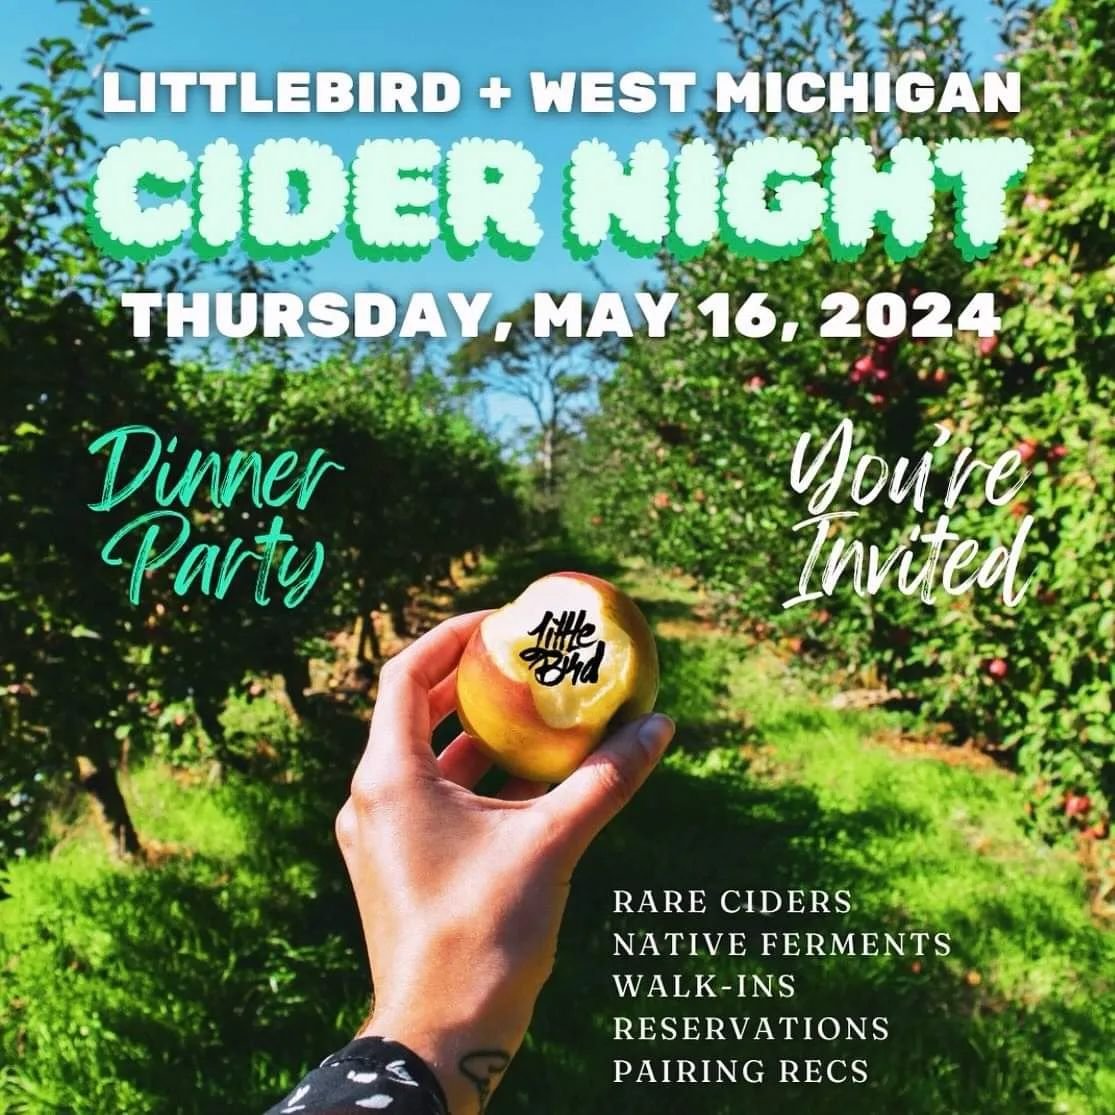 Grand Rapids friends!&nbsp;

@thelittlebirdgr is including a couple of our ciders in their Cider Night menu this Thursday, May 16 🍏🎉

They&rsquo;ll be featuring a unique selection of rare ciders to highlight the diversity of apples and approaches, 